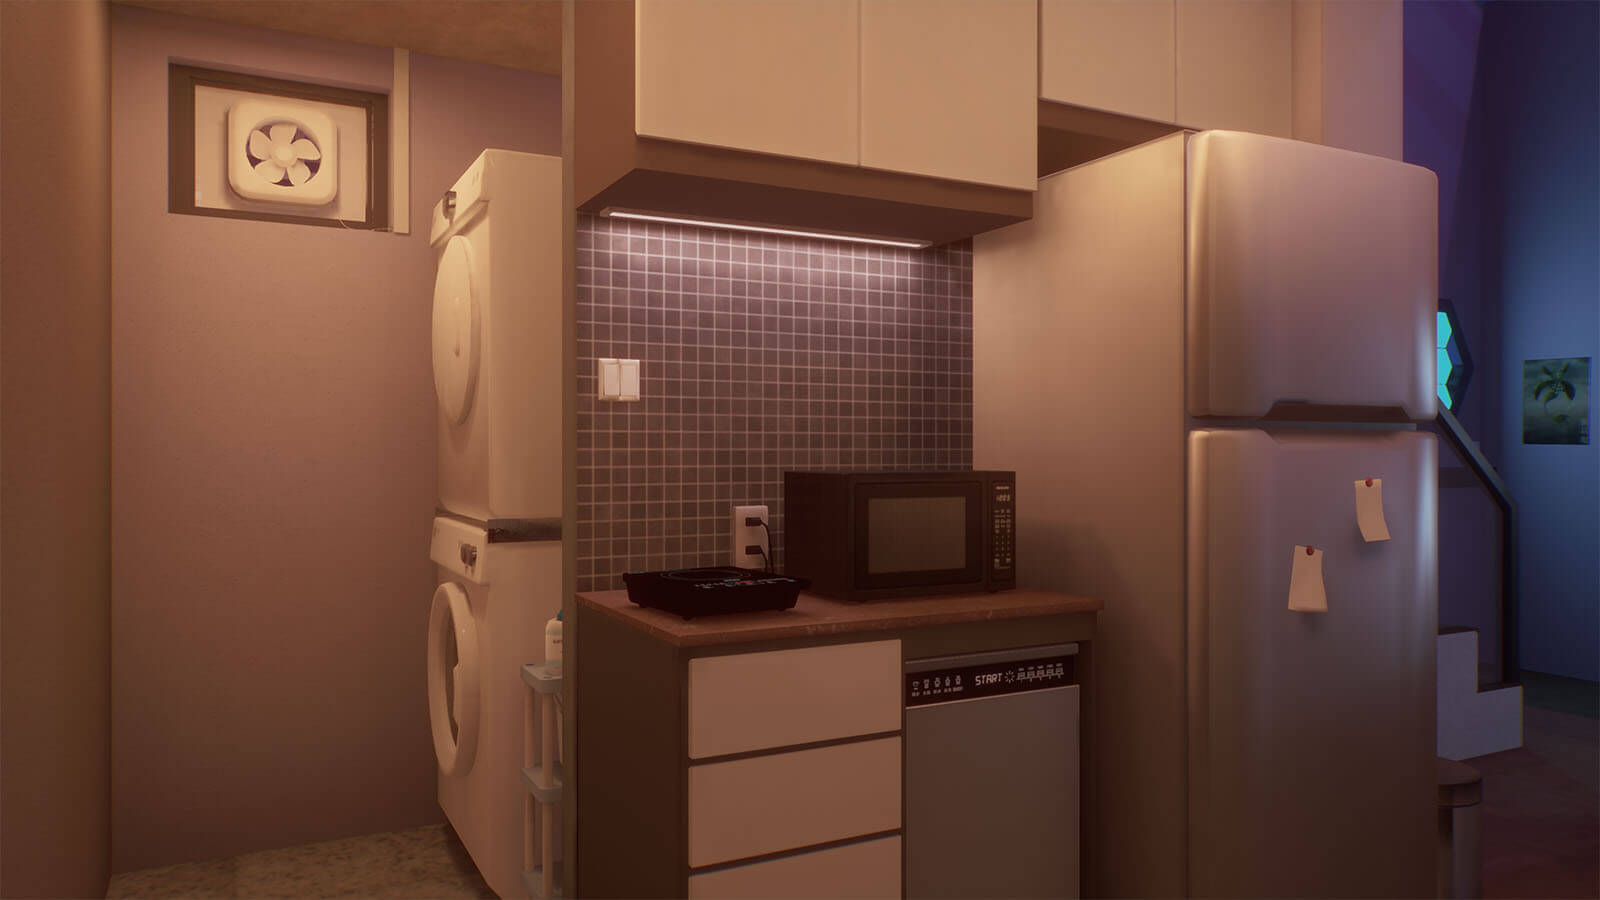 3D rendered view of a small kitchen and nearby washer and dryer.